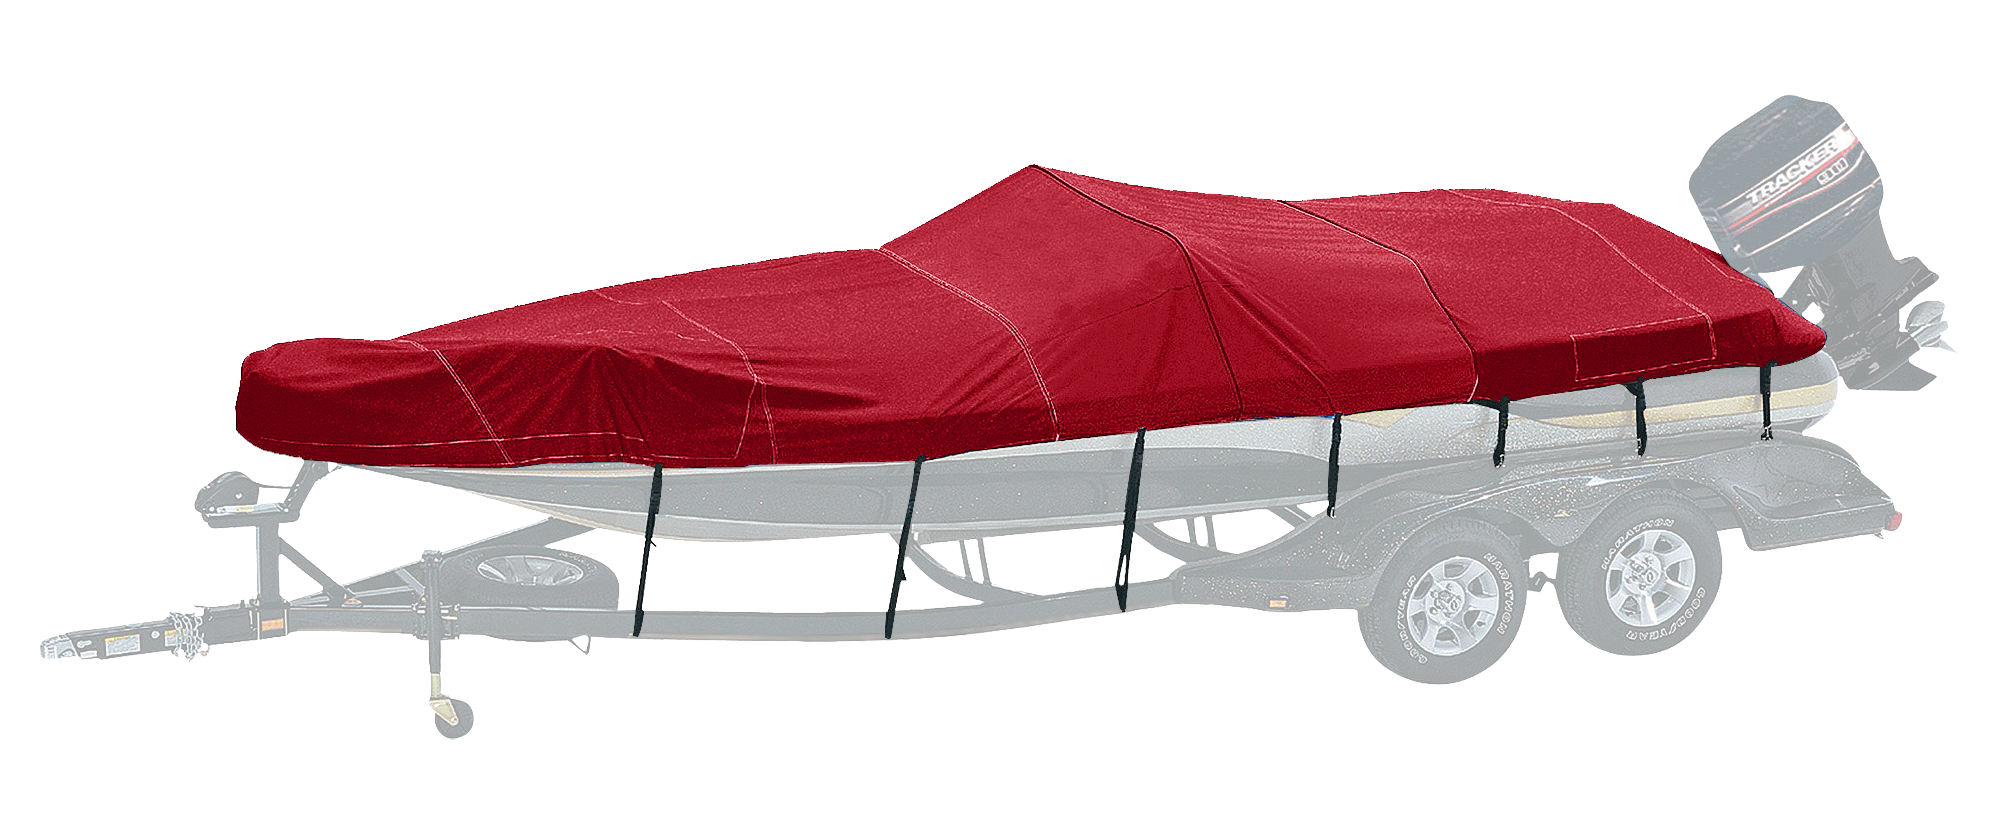 Bass Pro Shops Exact Fit Custom Boat Cover by Westland - Tracker Boats - 2004-2005 Tundra 21 DC - Burgundy